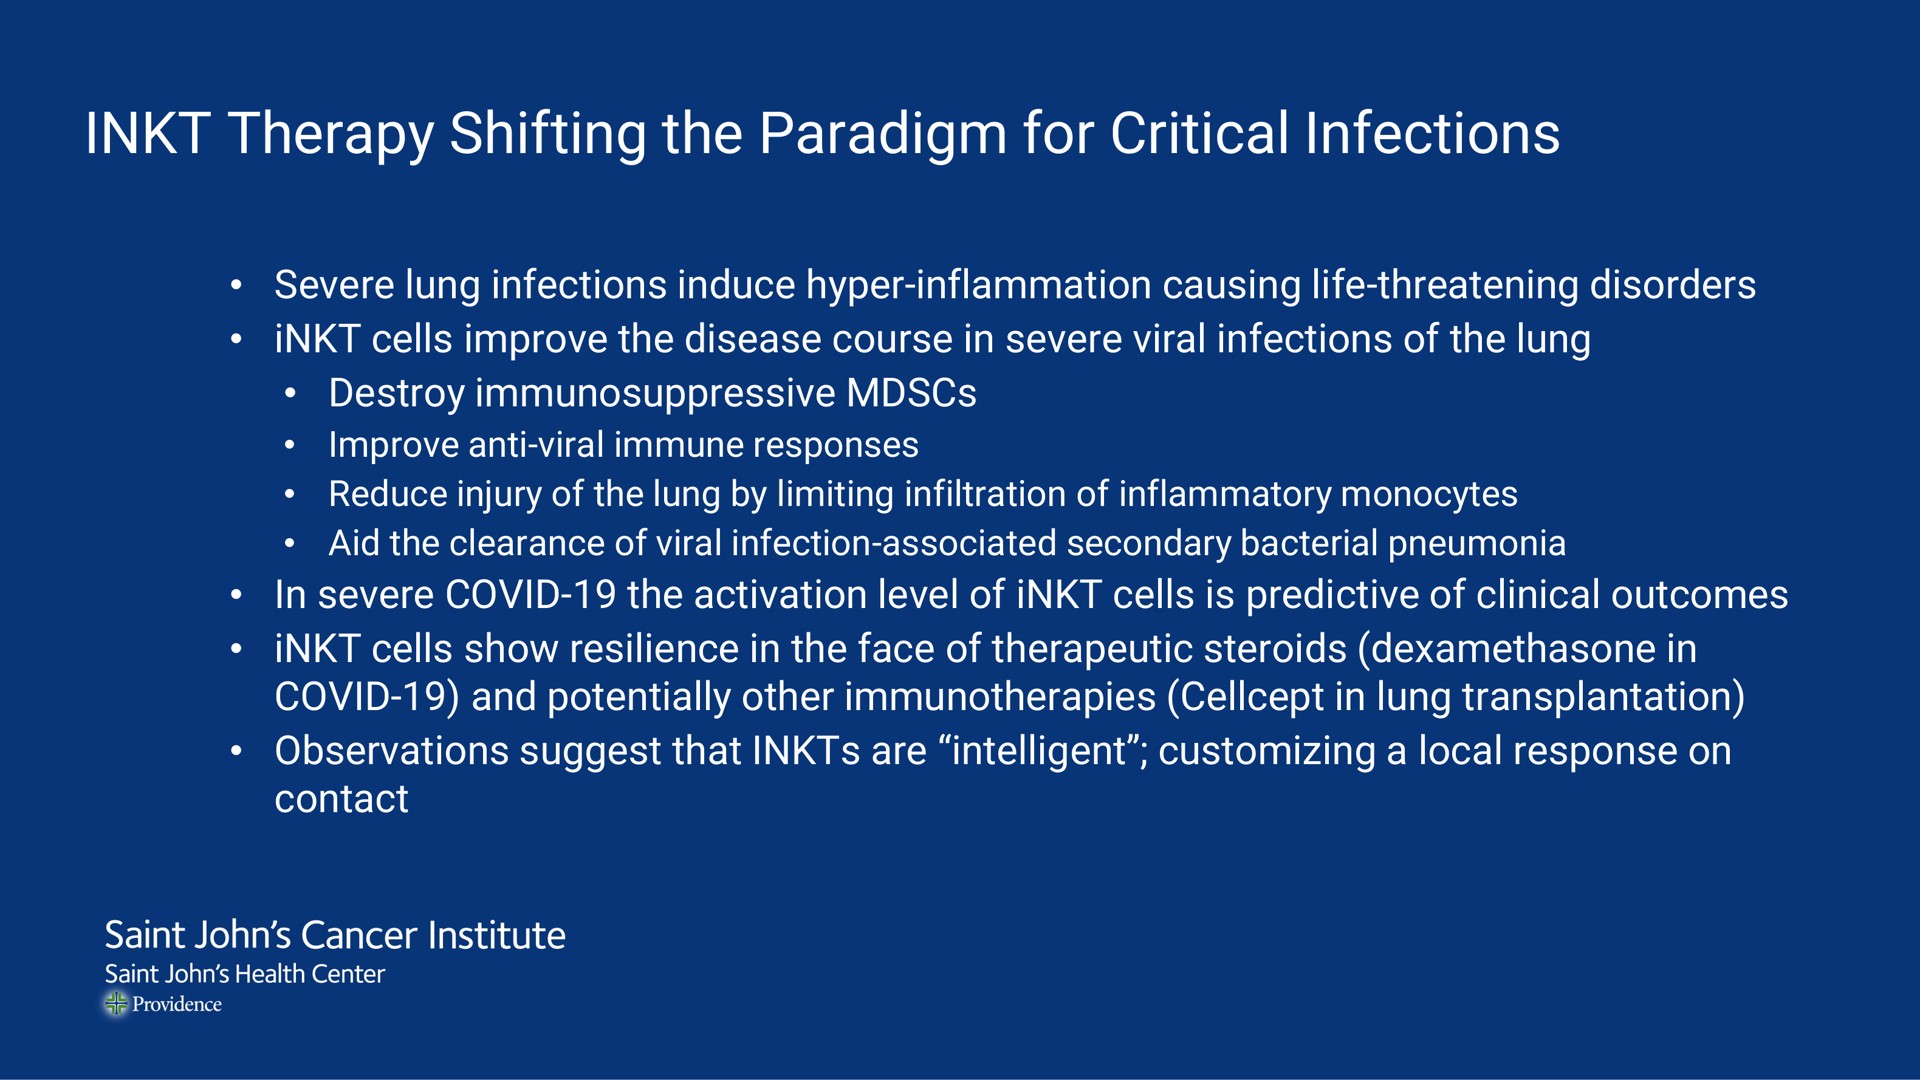 therapy shifting the paradigm for critical infections | Mink Therapeutics